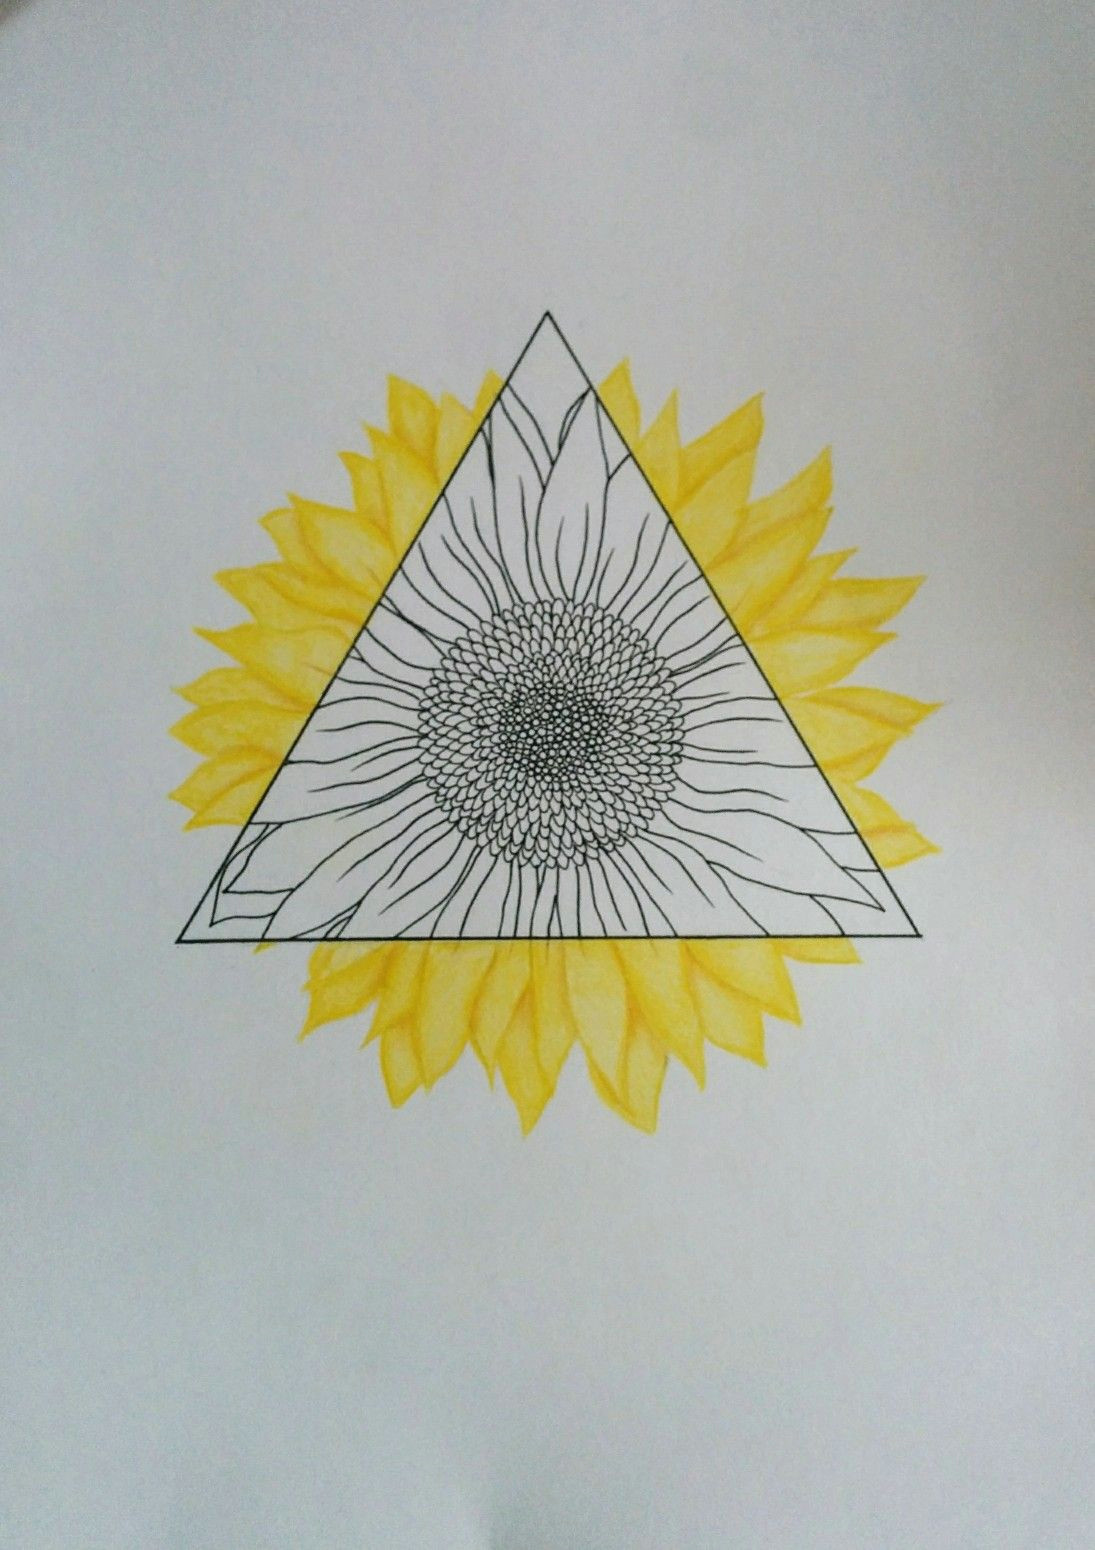 M K Drawing Sunflower Triangle Hipster Wallpaper by Mk Arts Mywork Tattoos